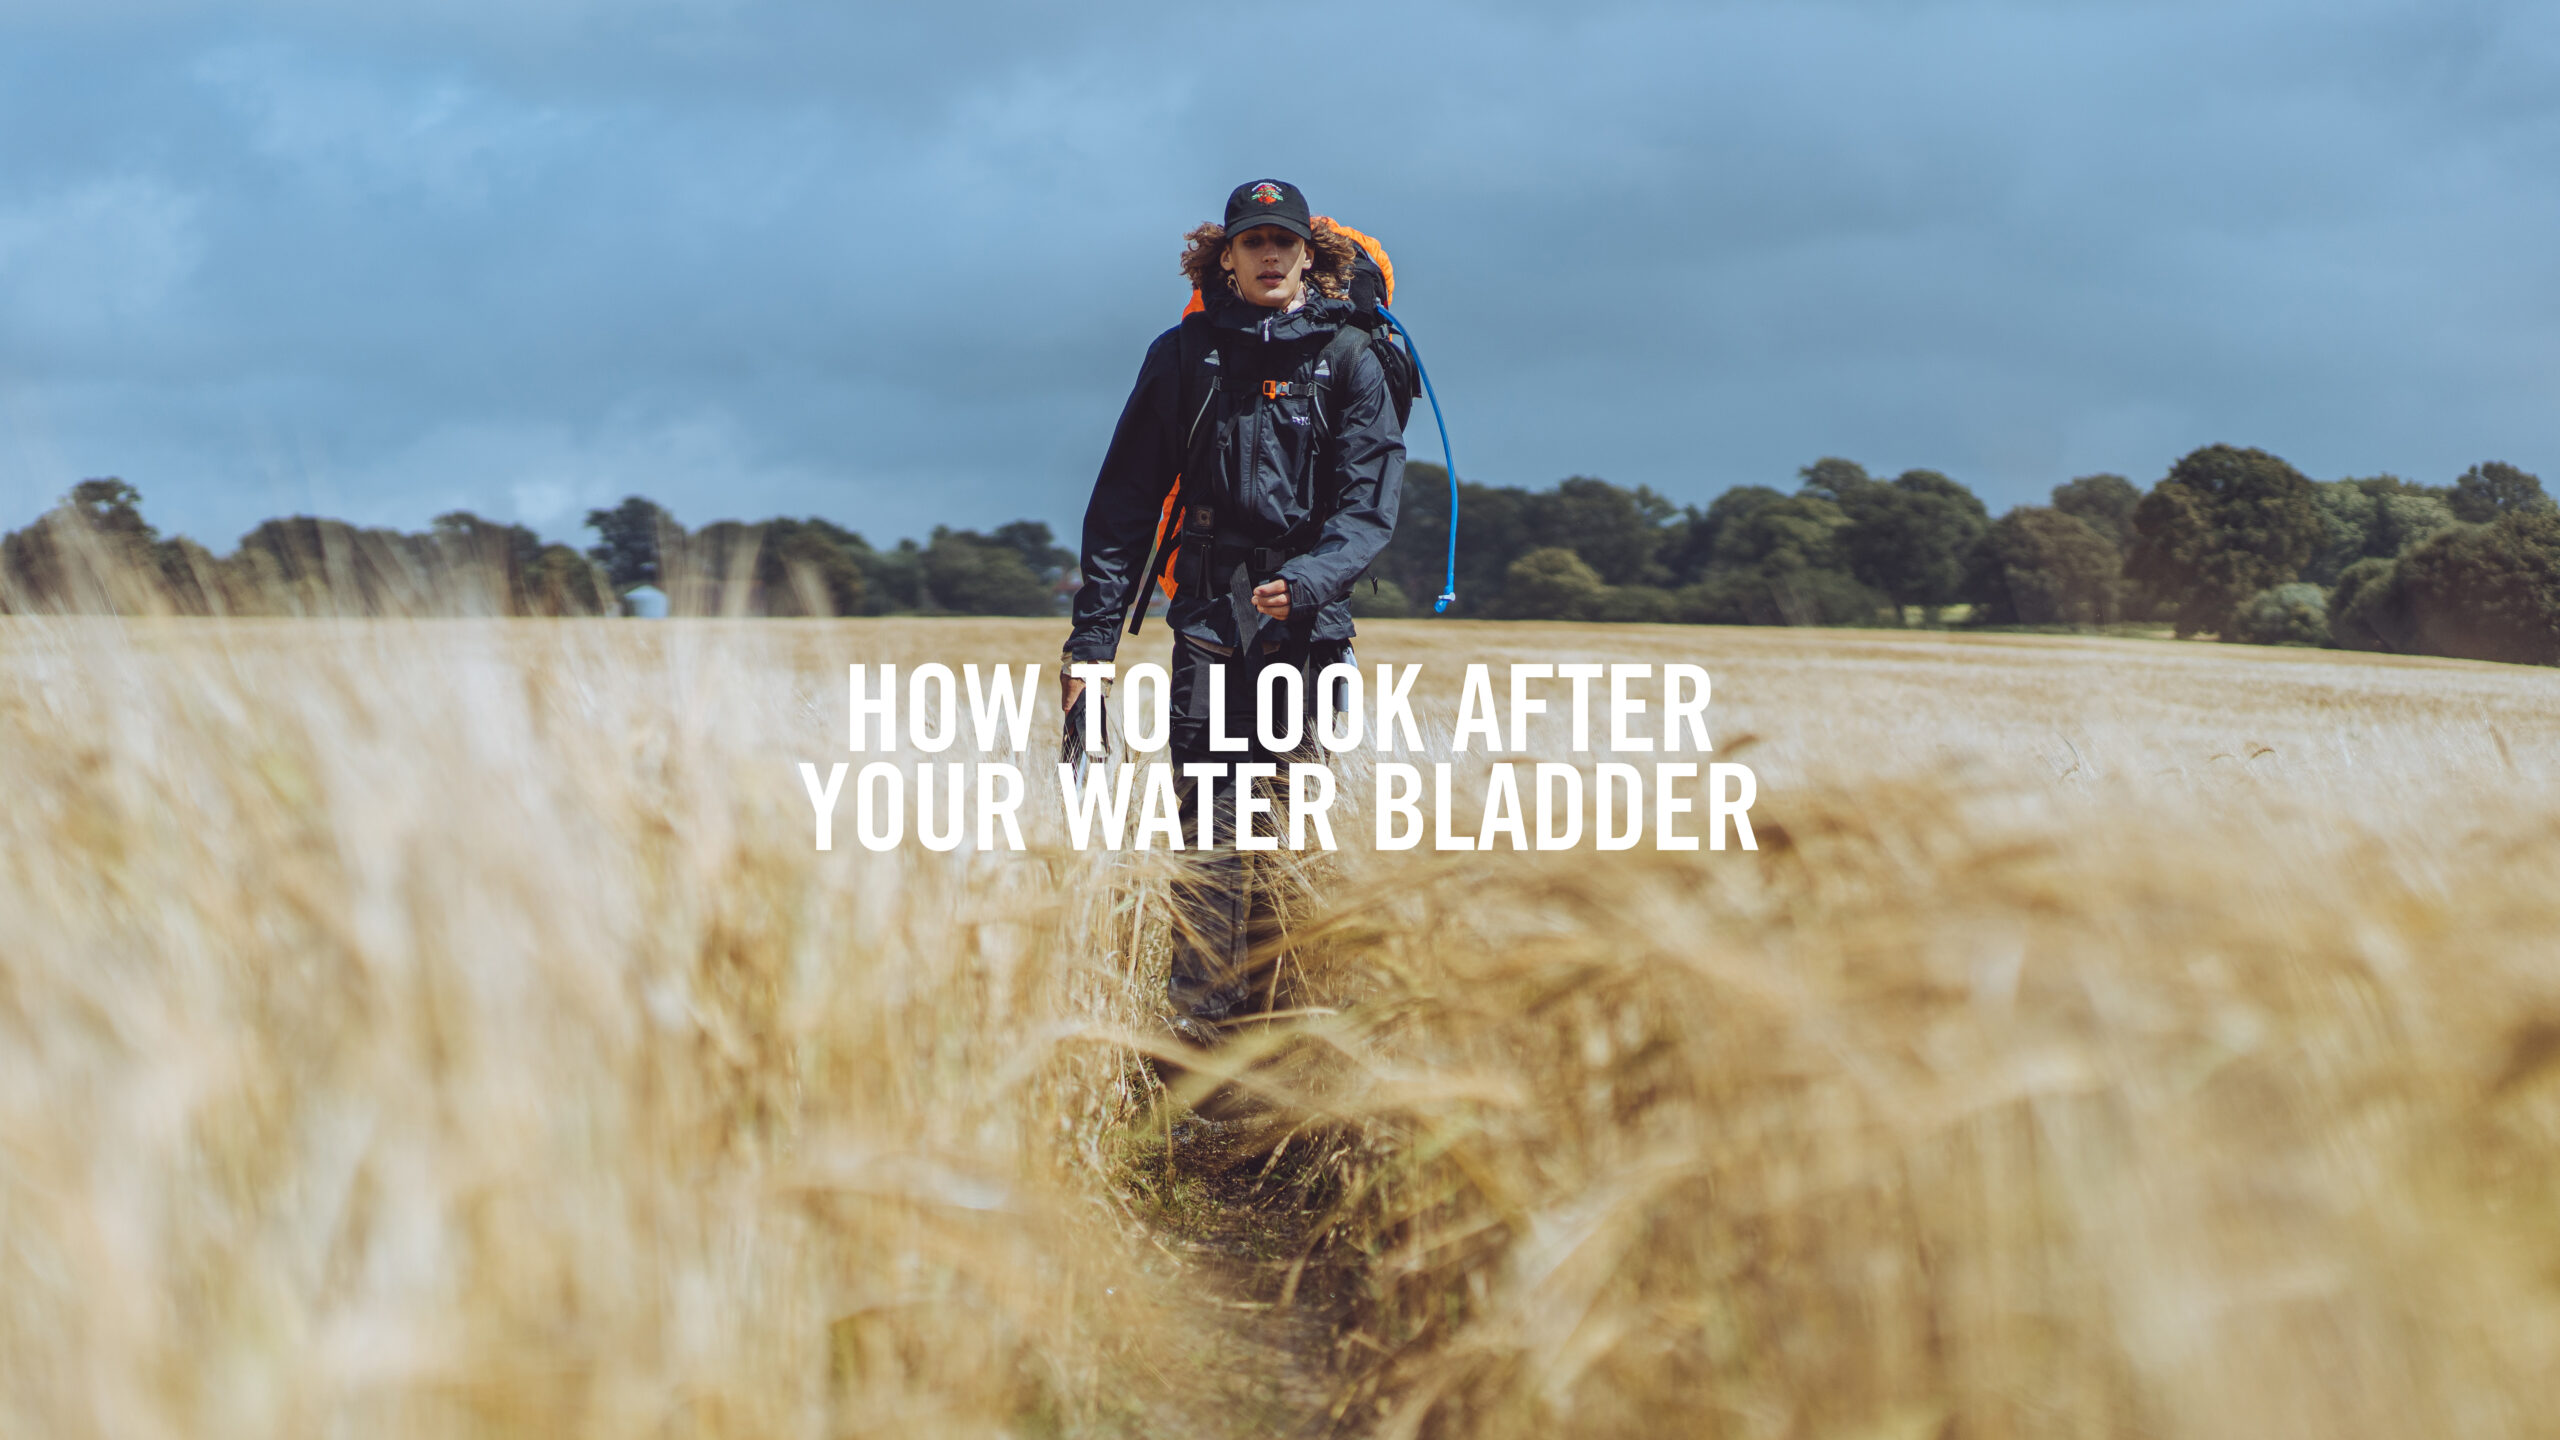 How to look after your water bladder